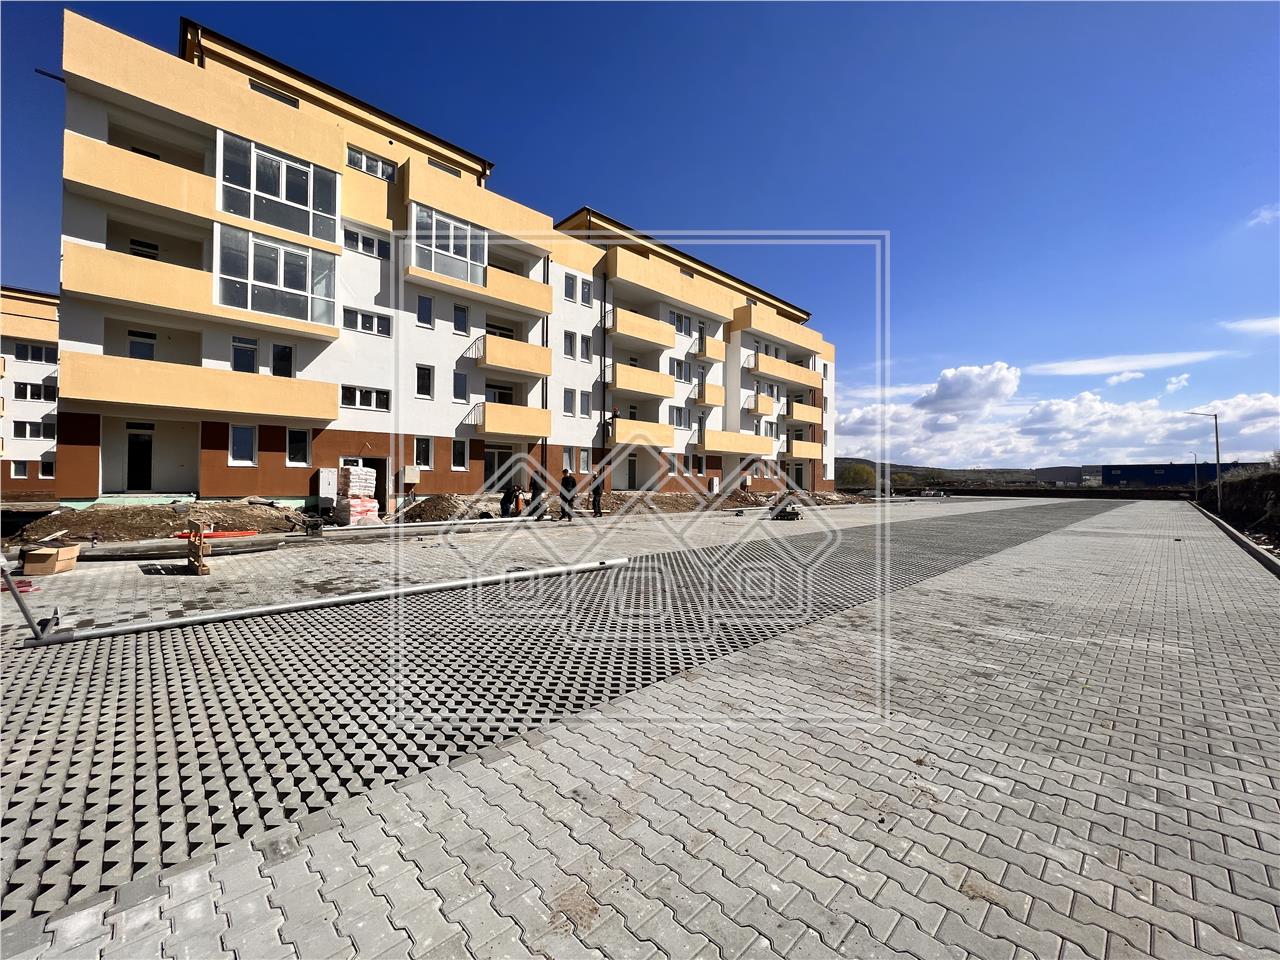 Studio for sale in Sibiu - separate kitchen and terrace of 15 sqm